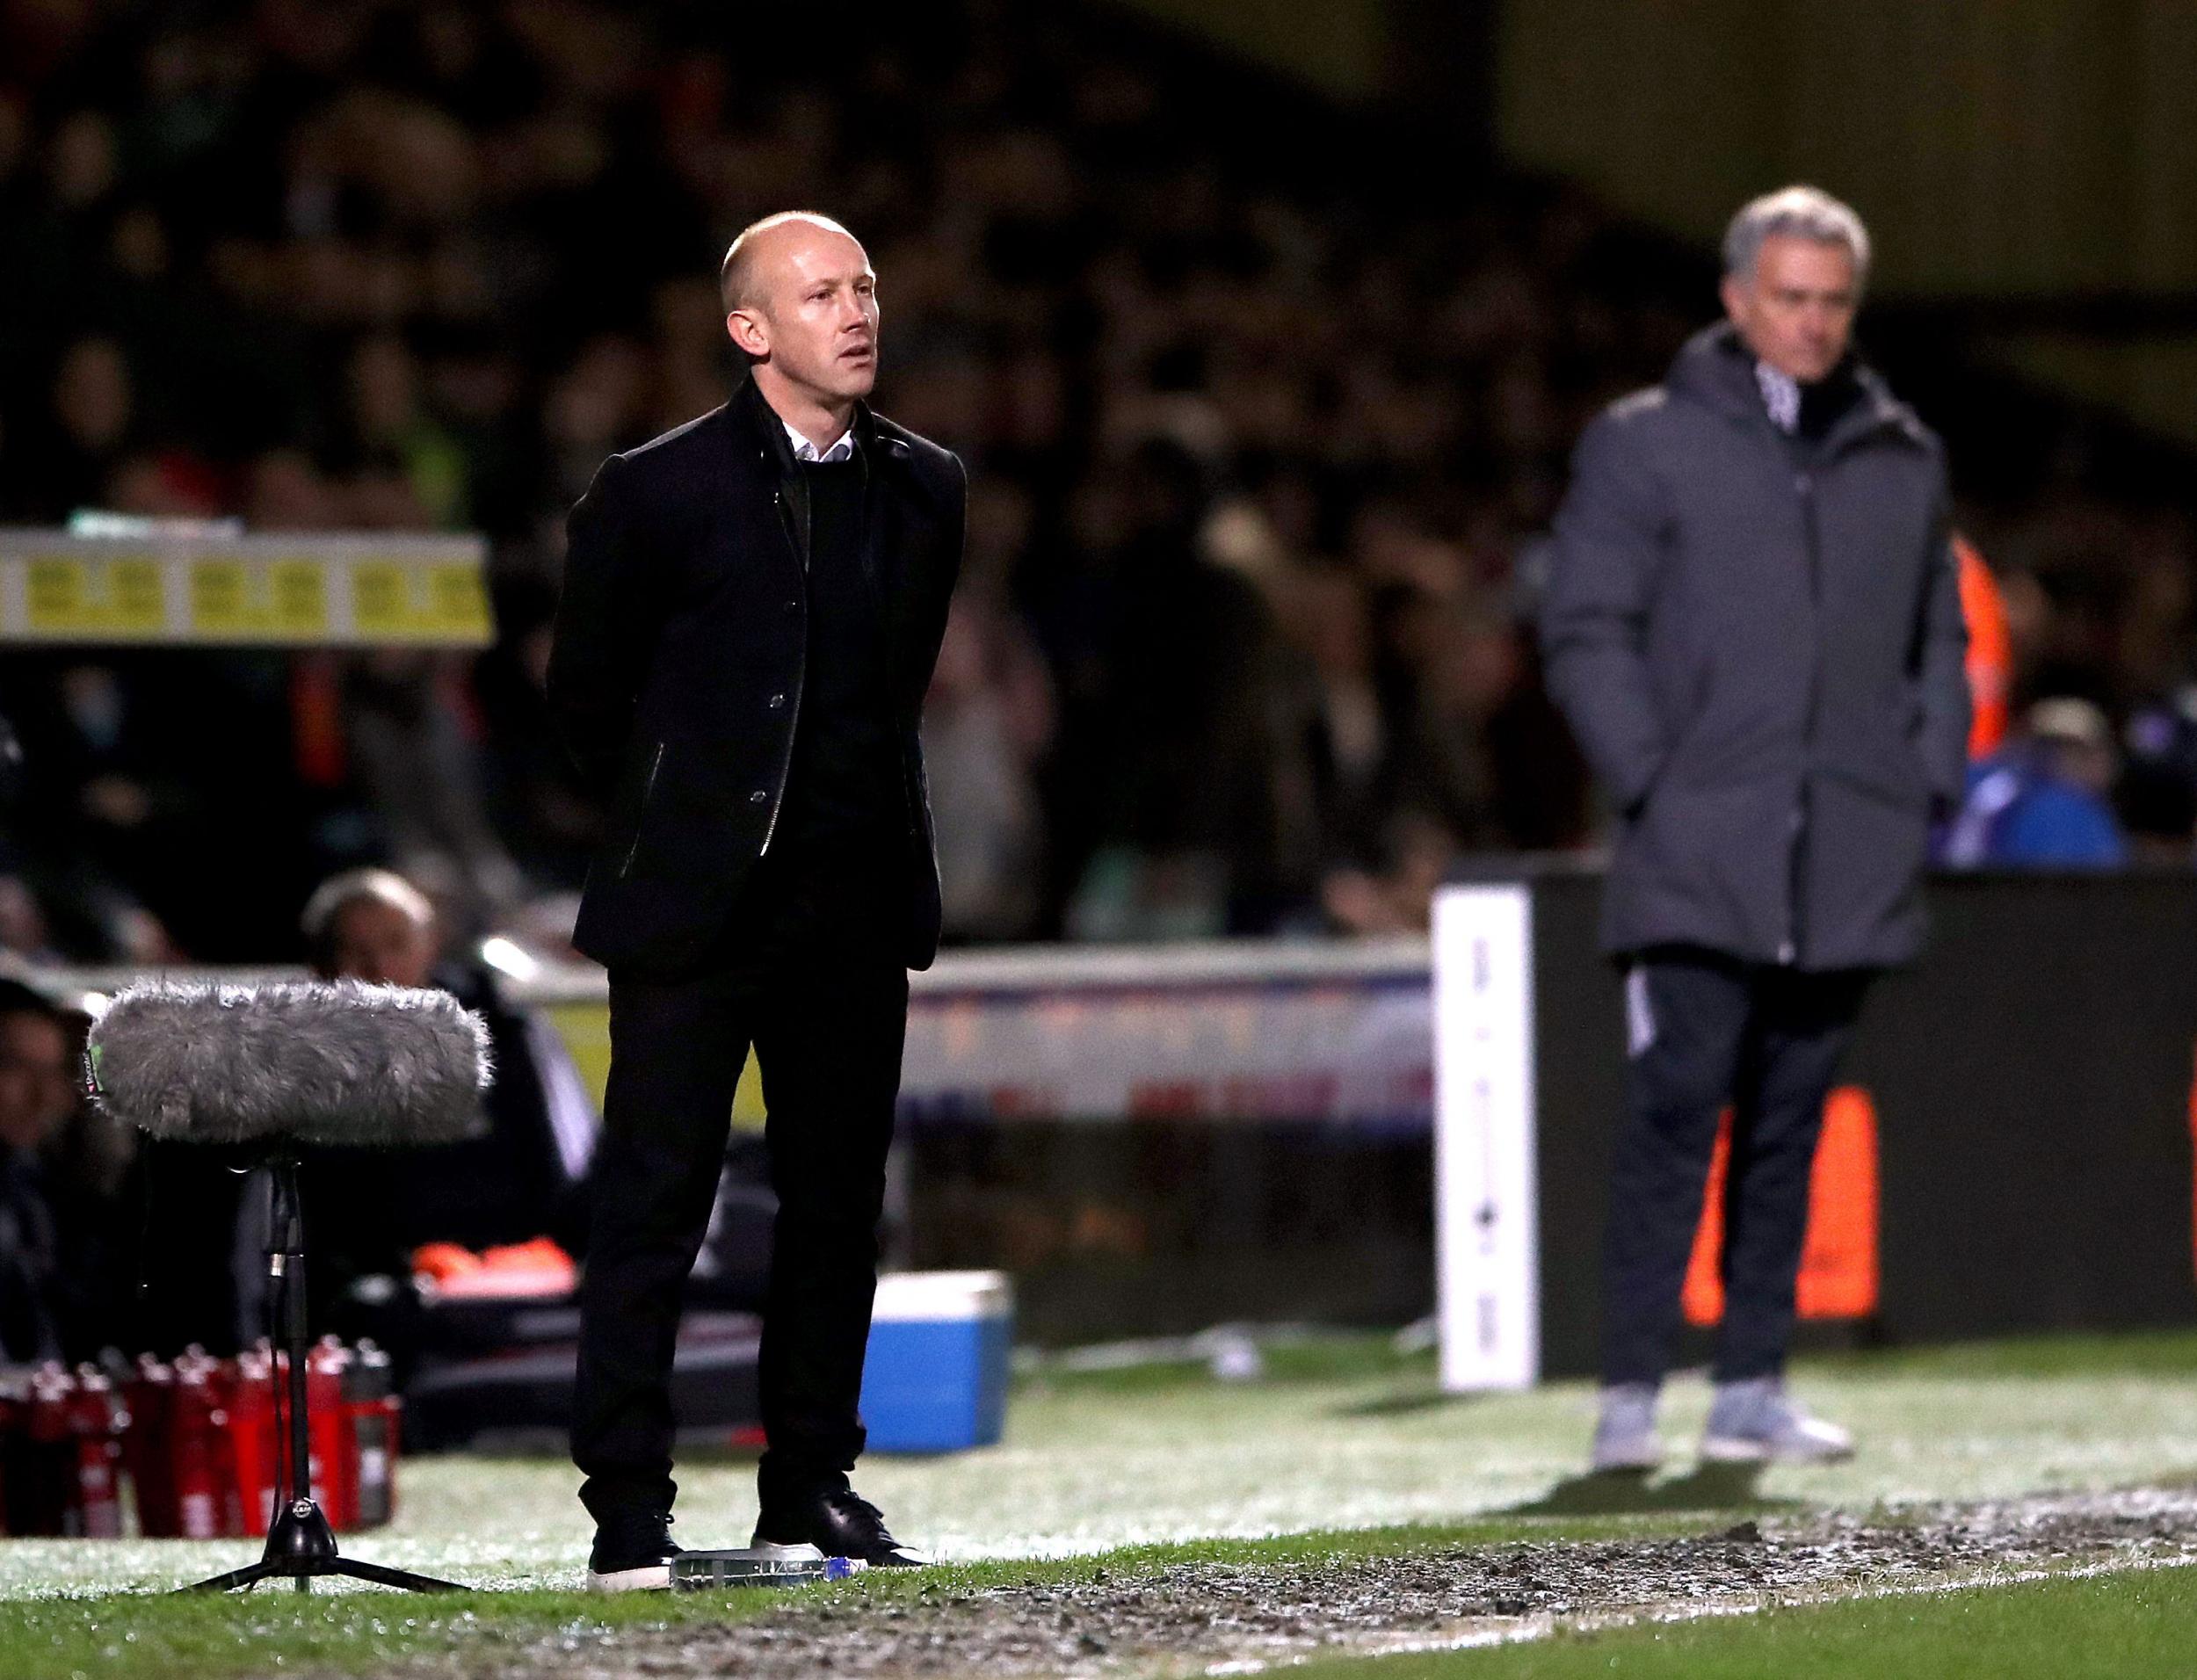 Jose Mourinho &apos;oozes class&apos; claims Yeovil Town boss Darren Way after Manchester United&apos;s FA Cup win